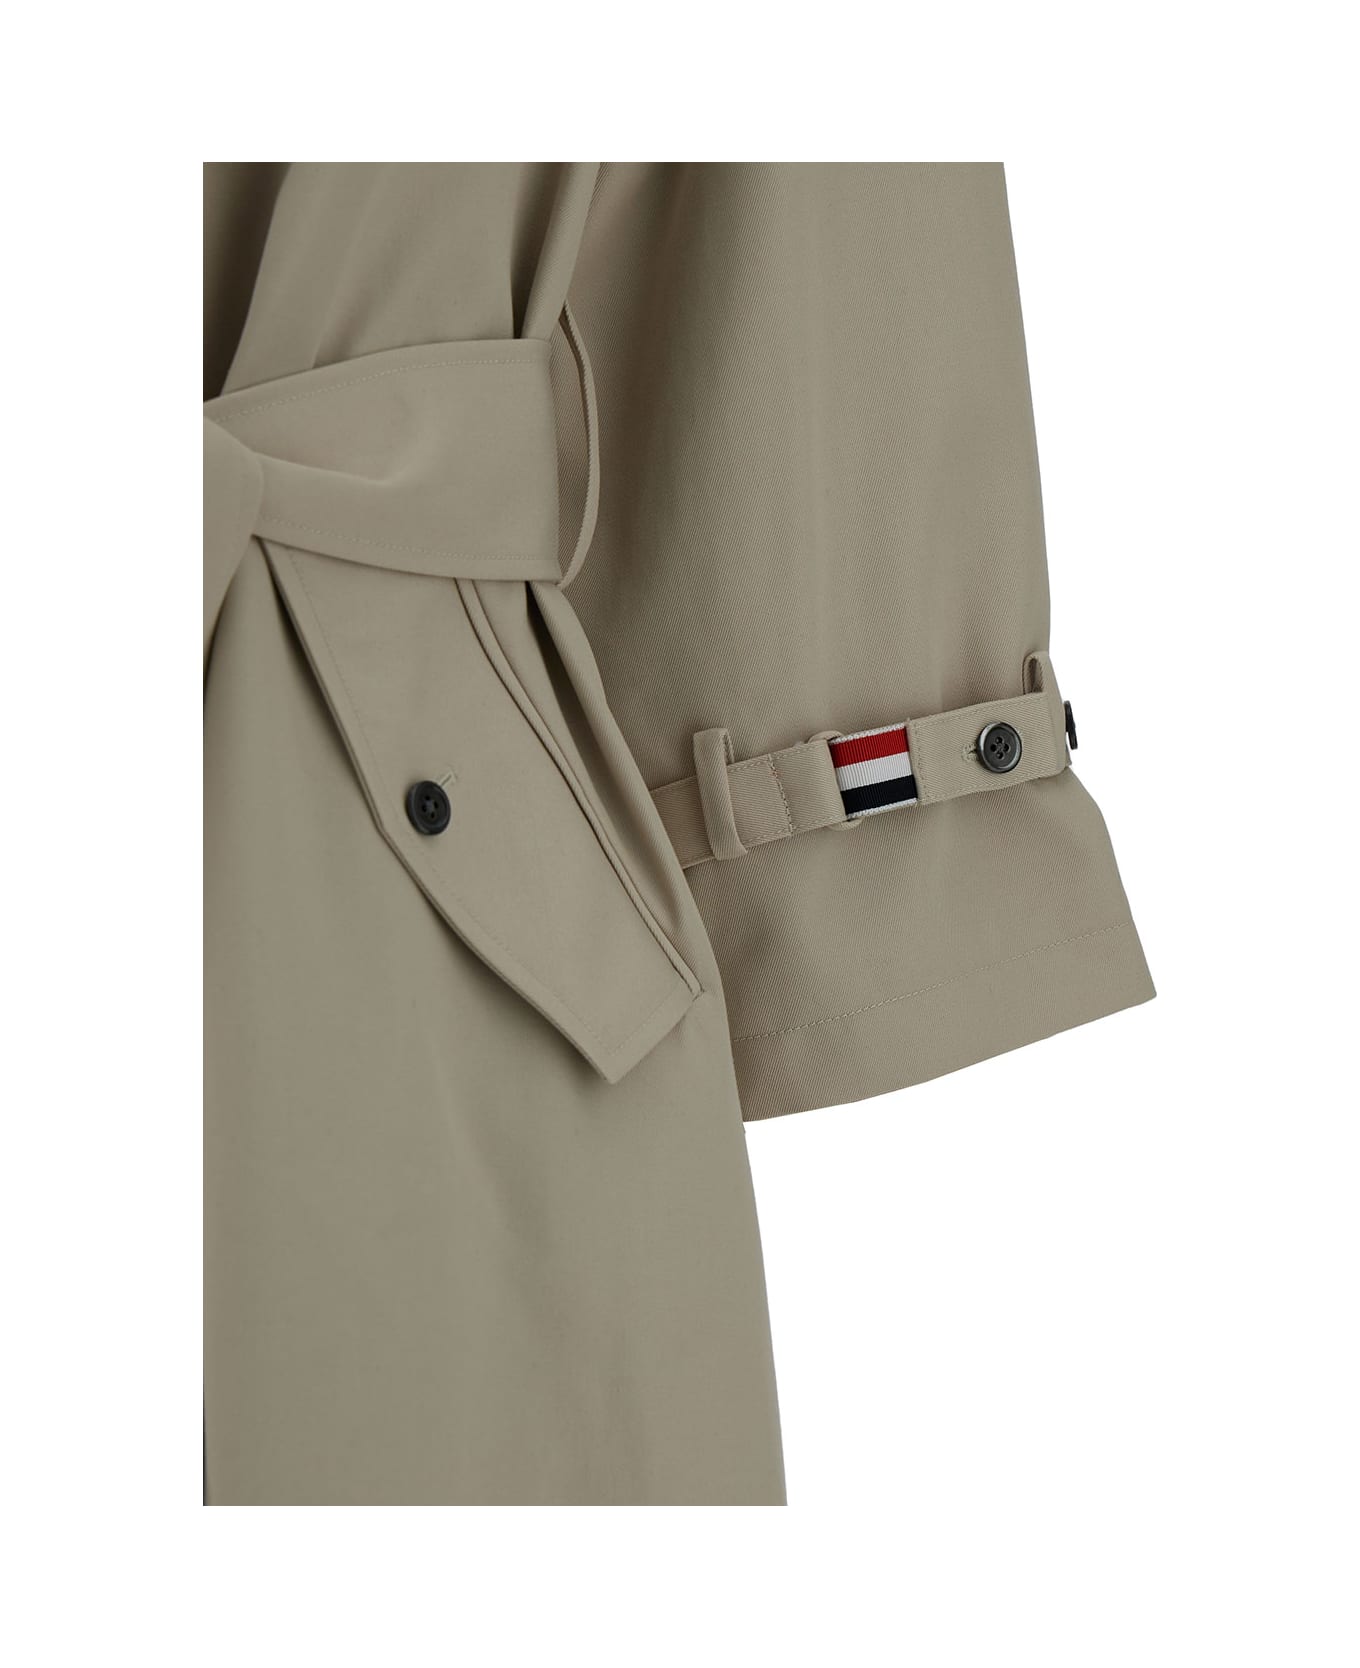 Thom Browne Beige Trench Coat With Matching Belt In Waterproof Cotton Woman - Beige